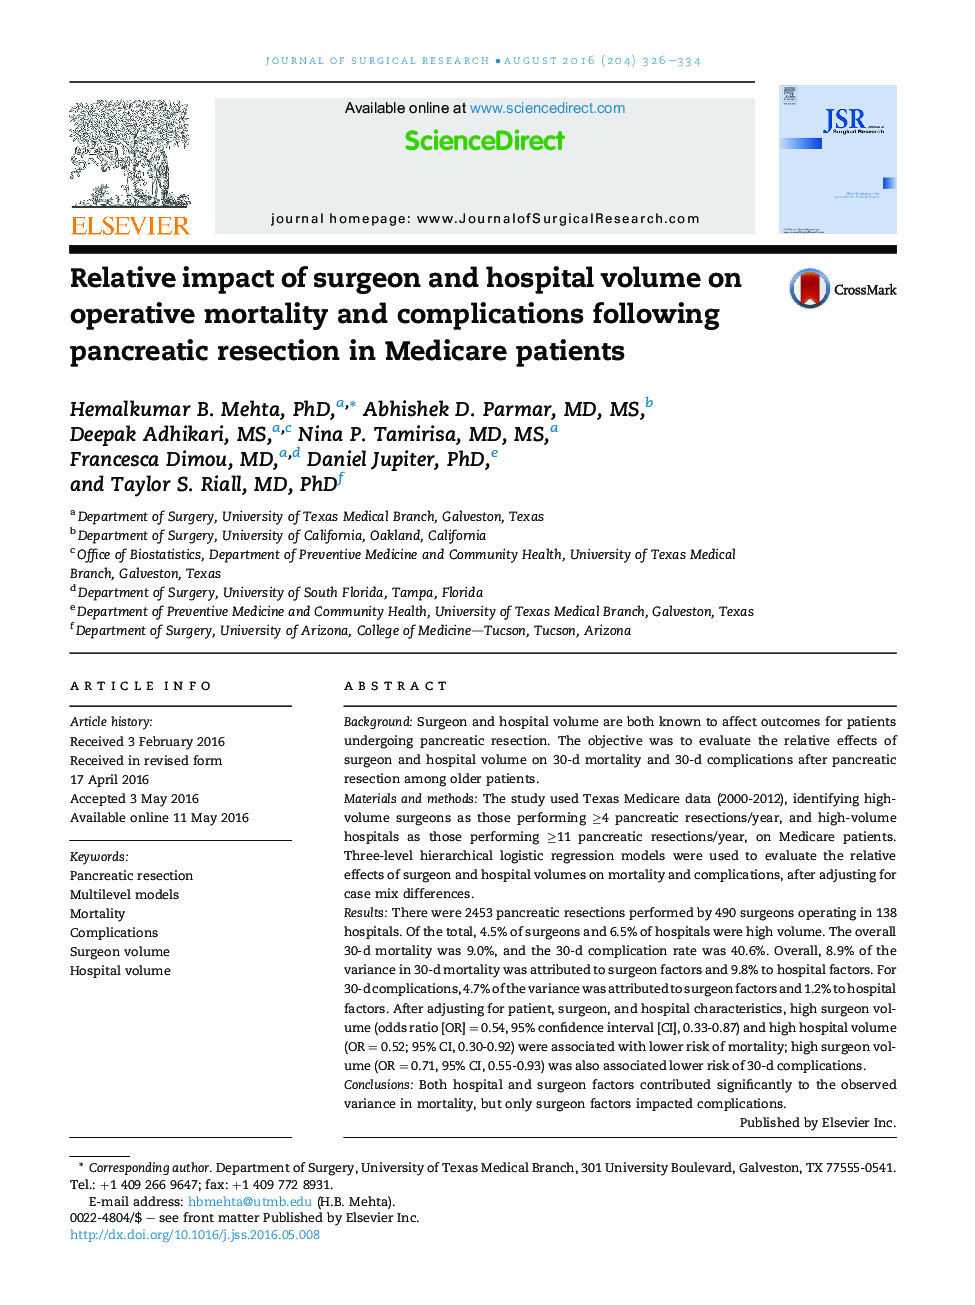 Relative impact of surgeon and hospital volume on operative mortality and complications following pancreatic resection in Medicare patients